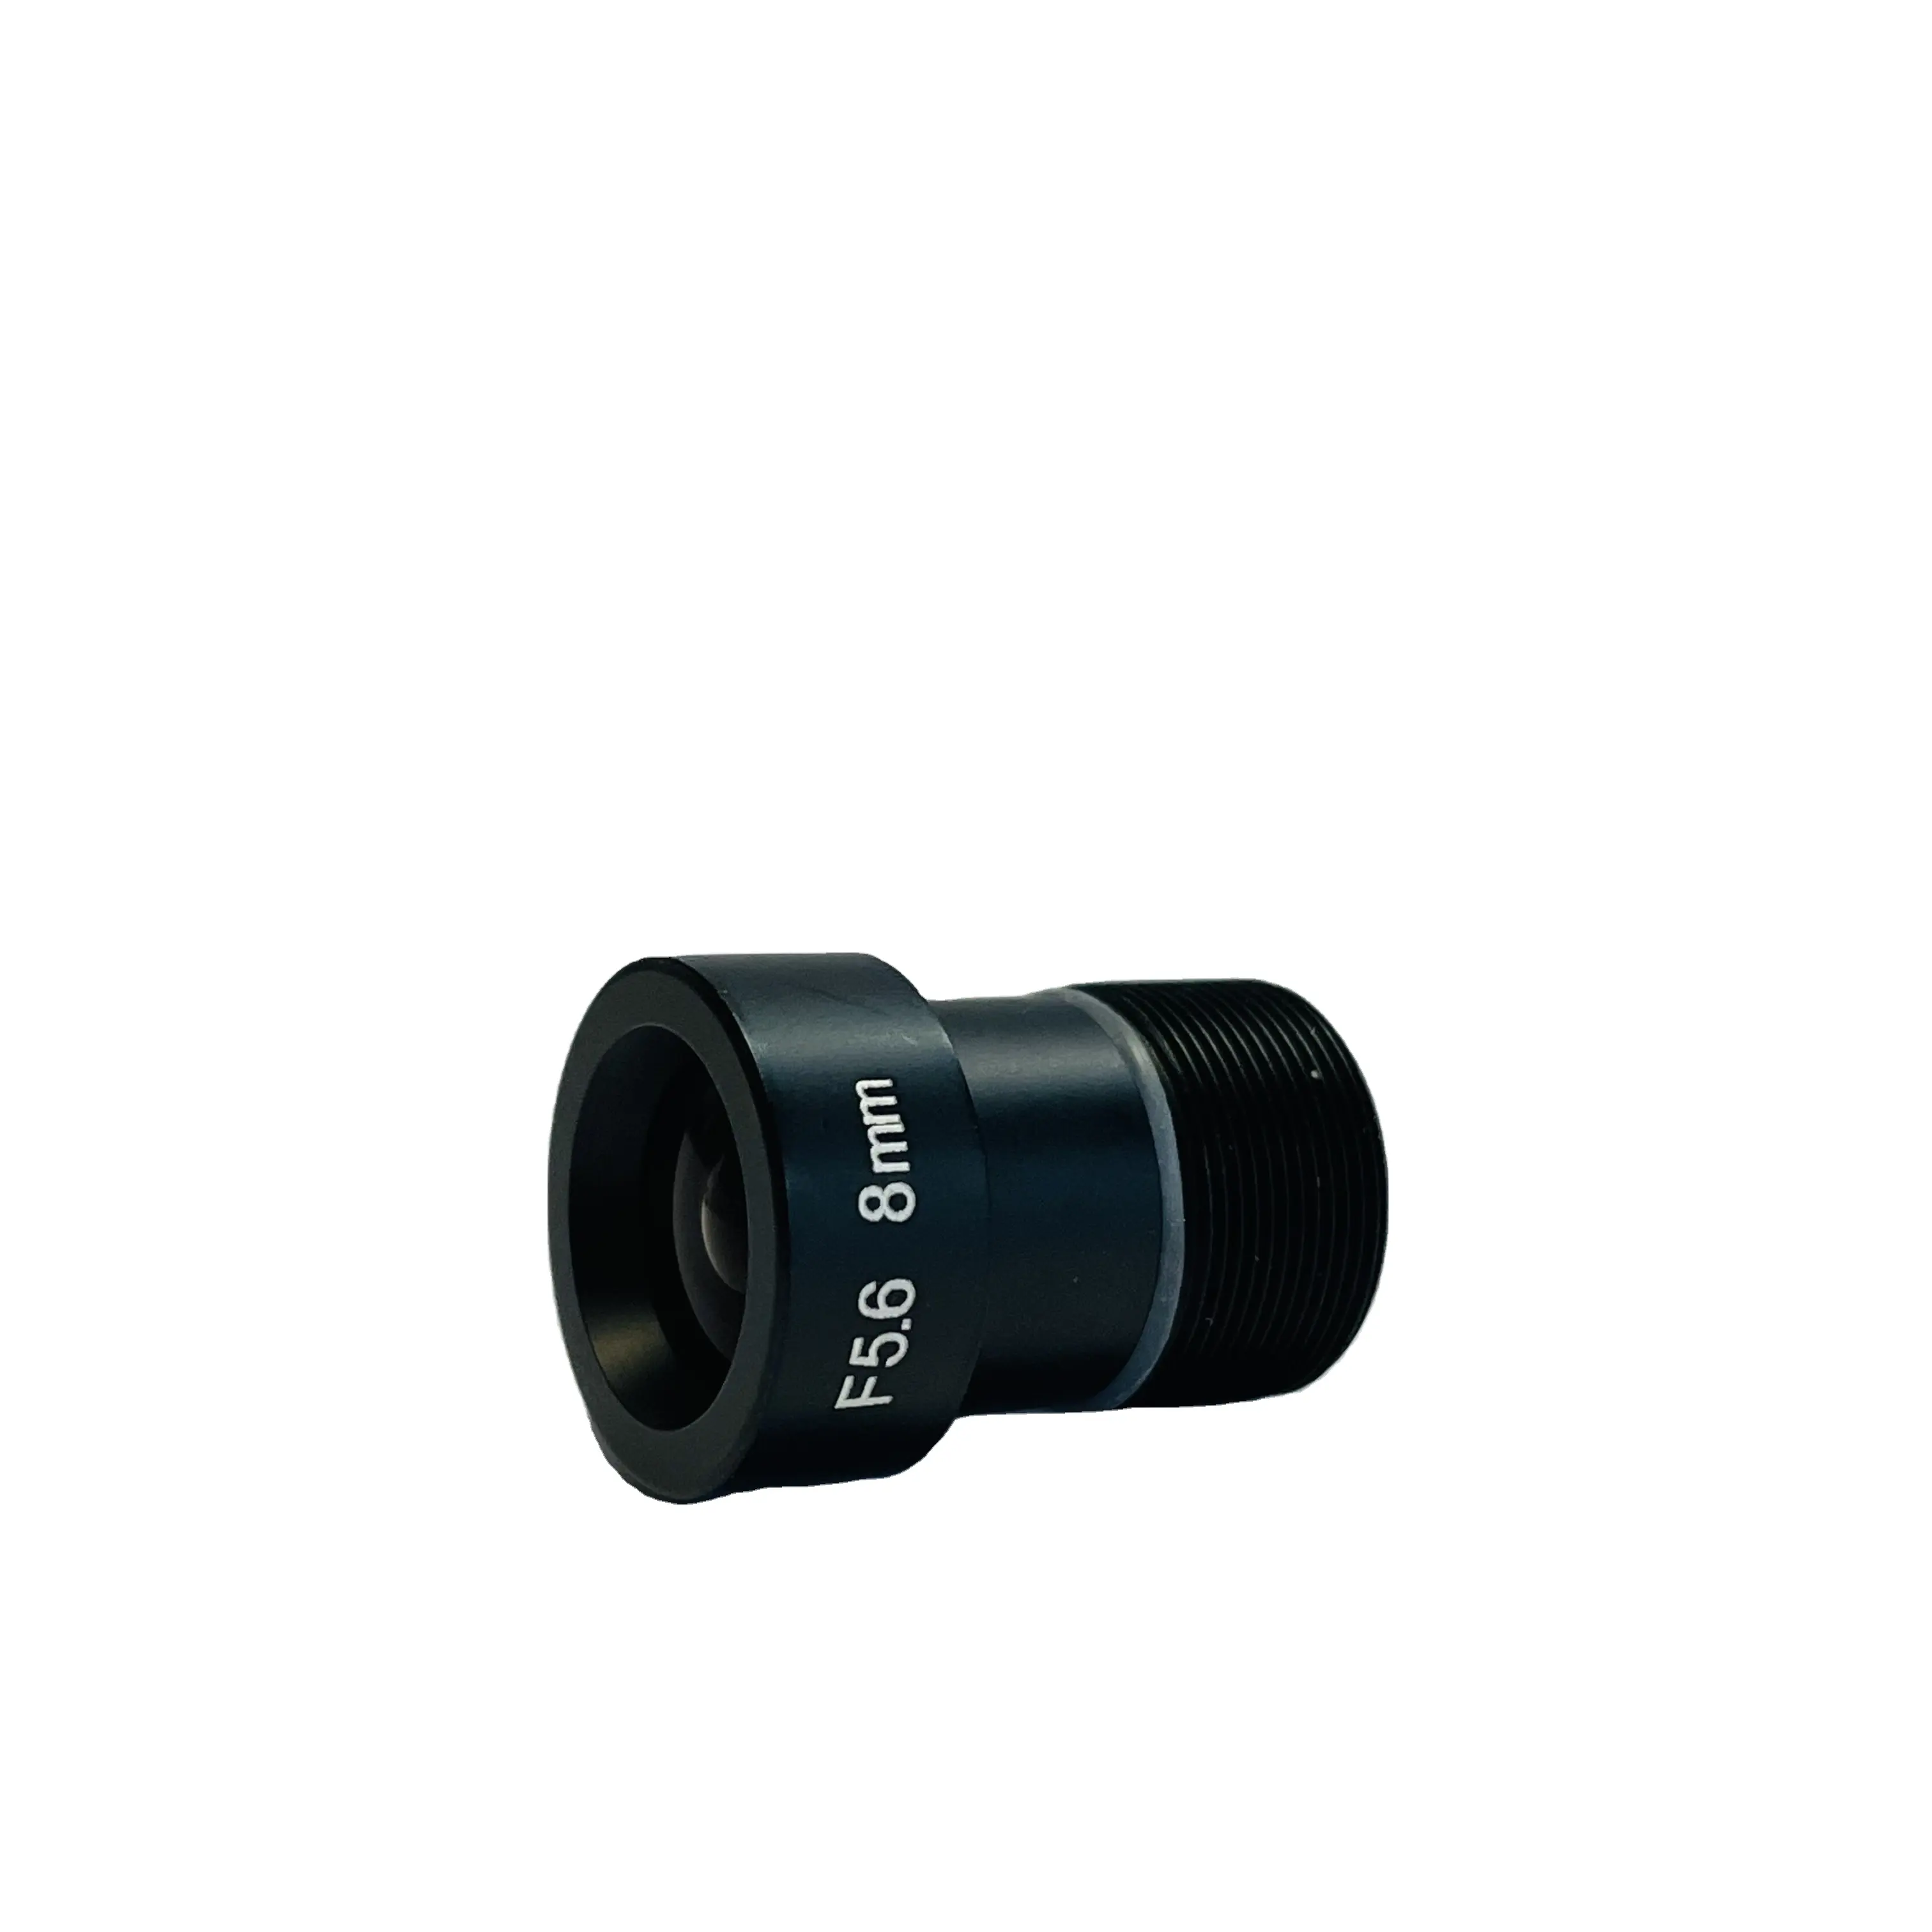 1/3" 8mm F5.6 optical camera lens with IR filter10MP high resolution S-mount medical imaging lens